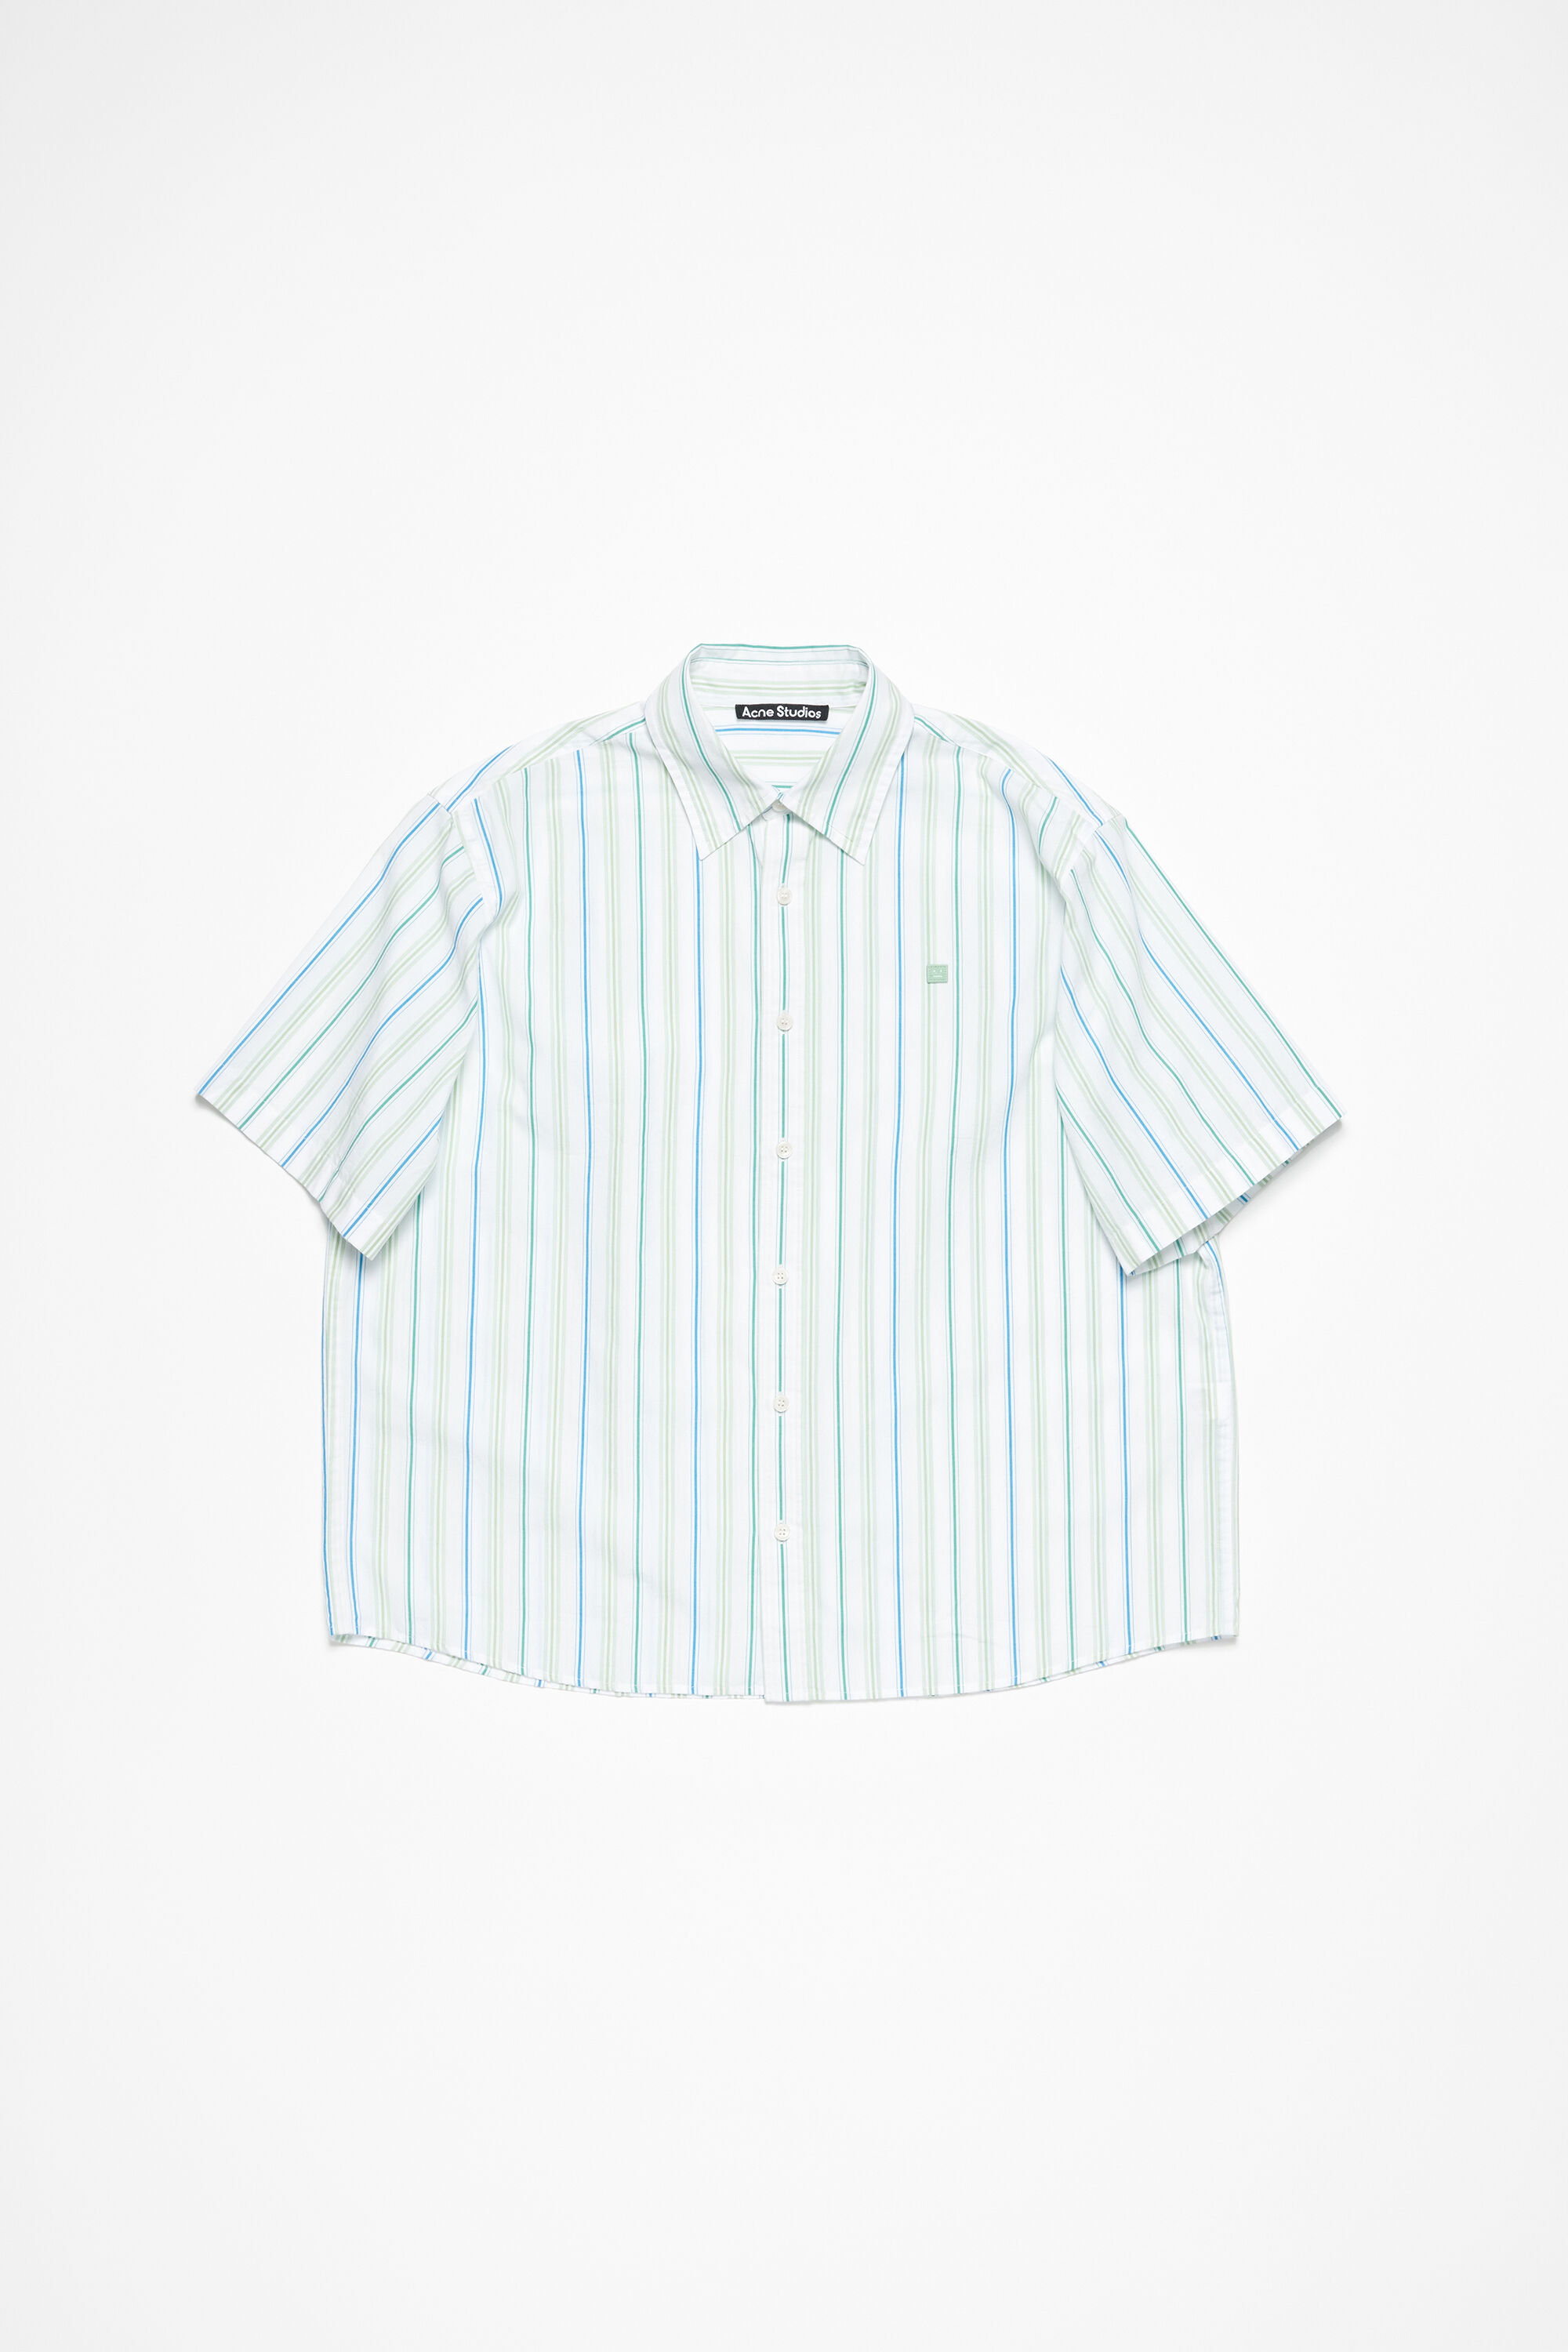 Acne Studios - Face collection - Shirts and overshirts